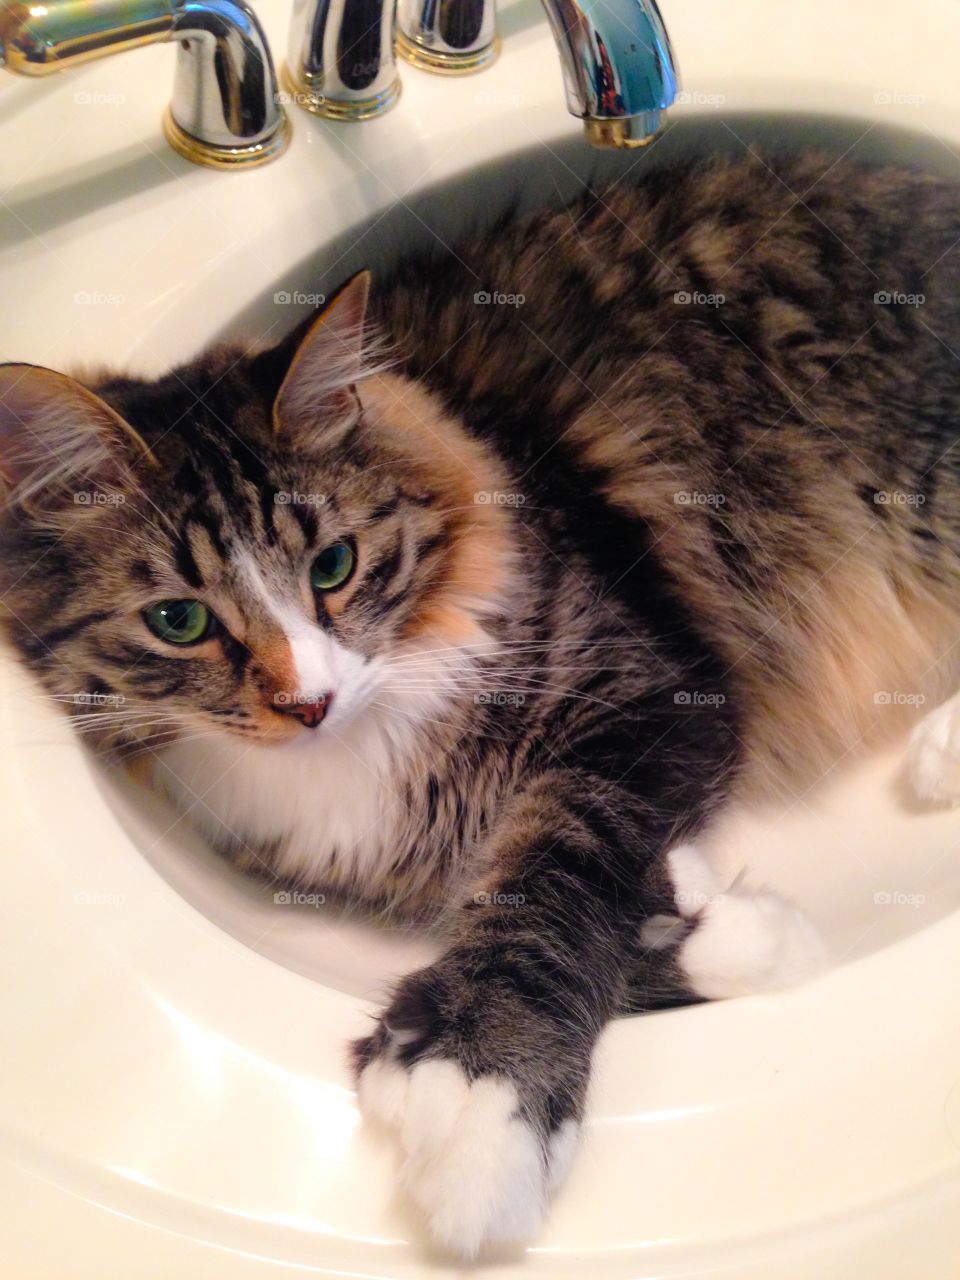 Sink Bed for Kitty